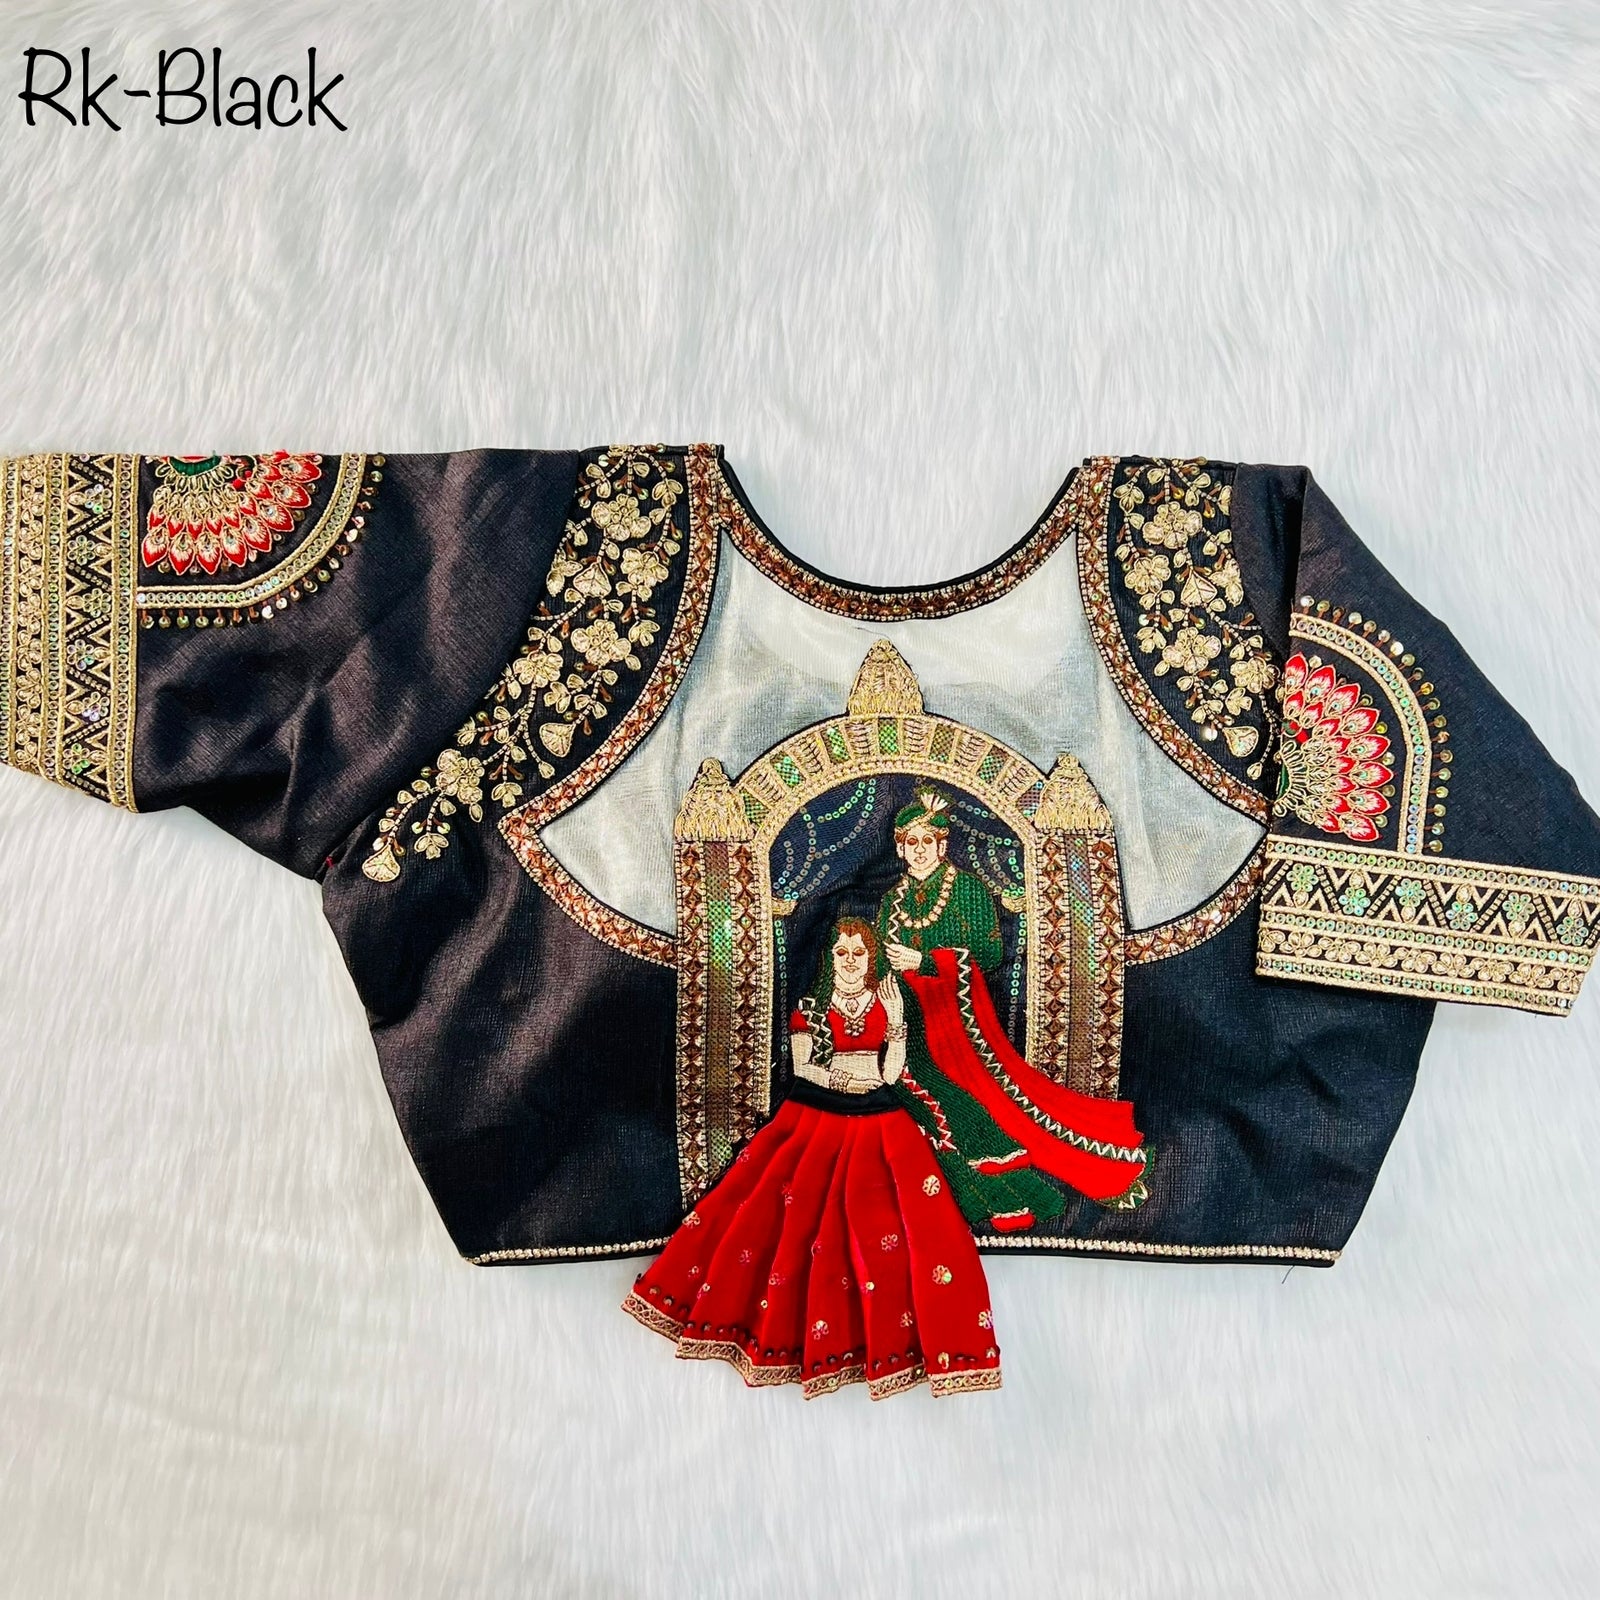 Barbie Wedding Blouse Anant Tex Exports Private Limited